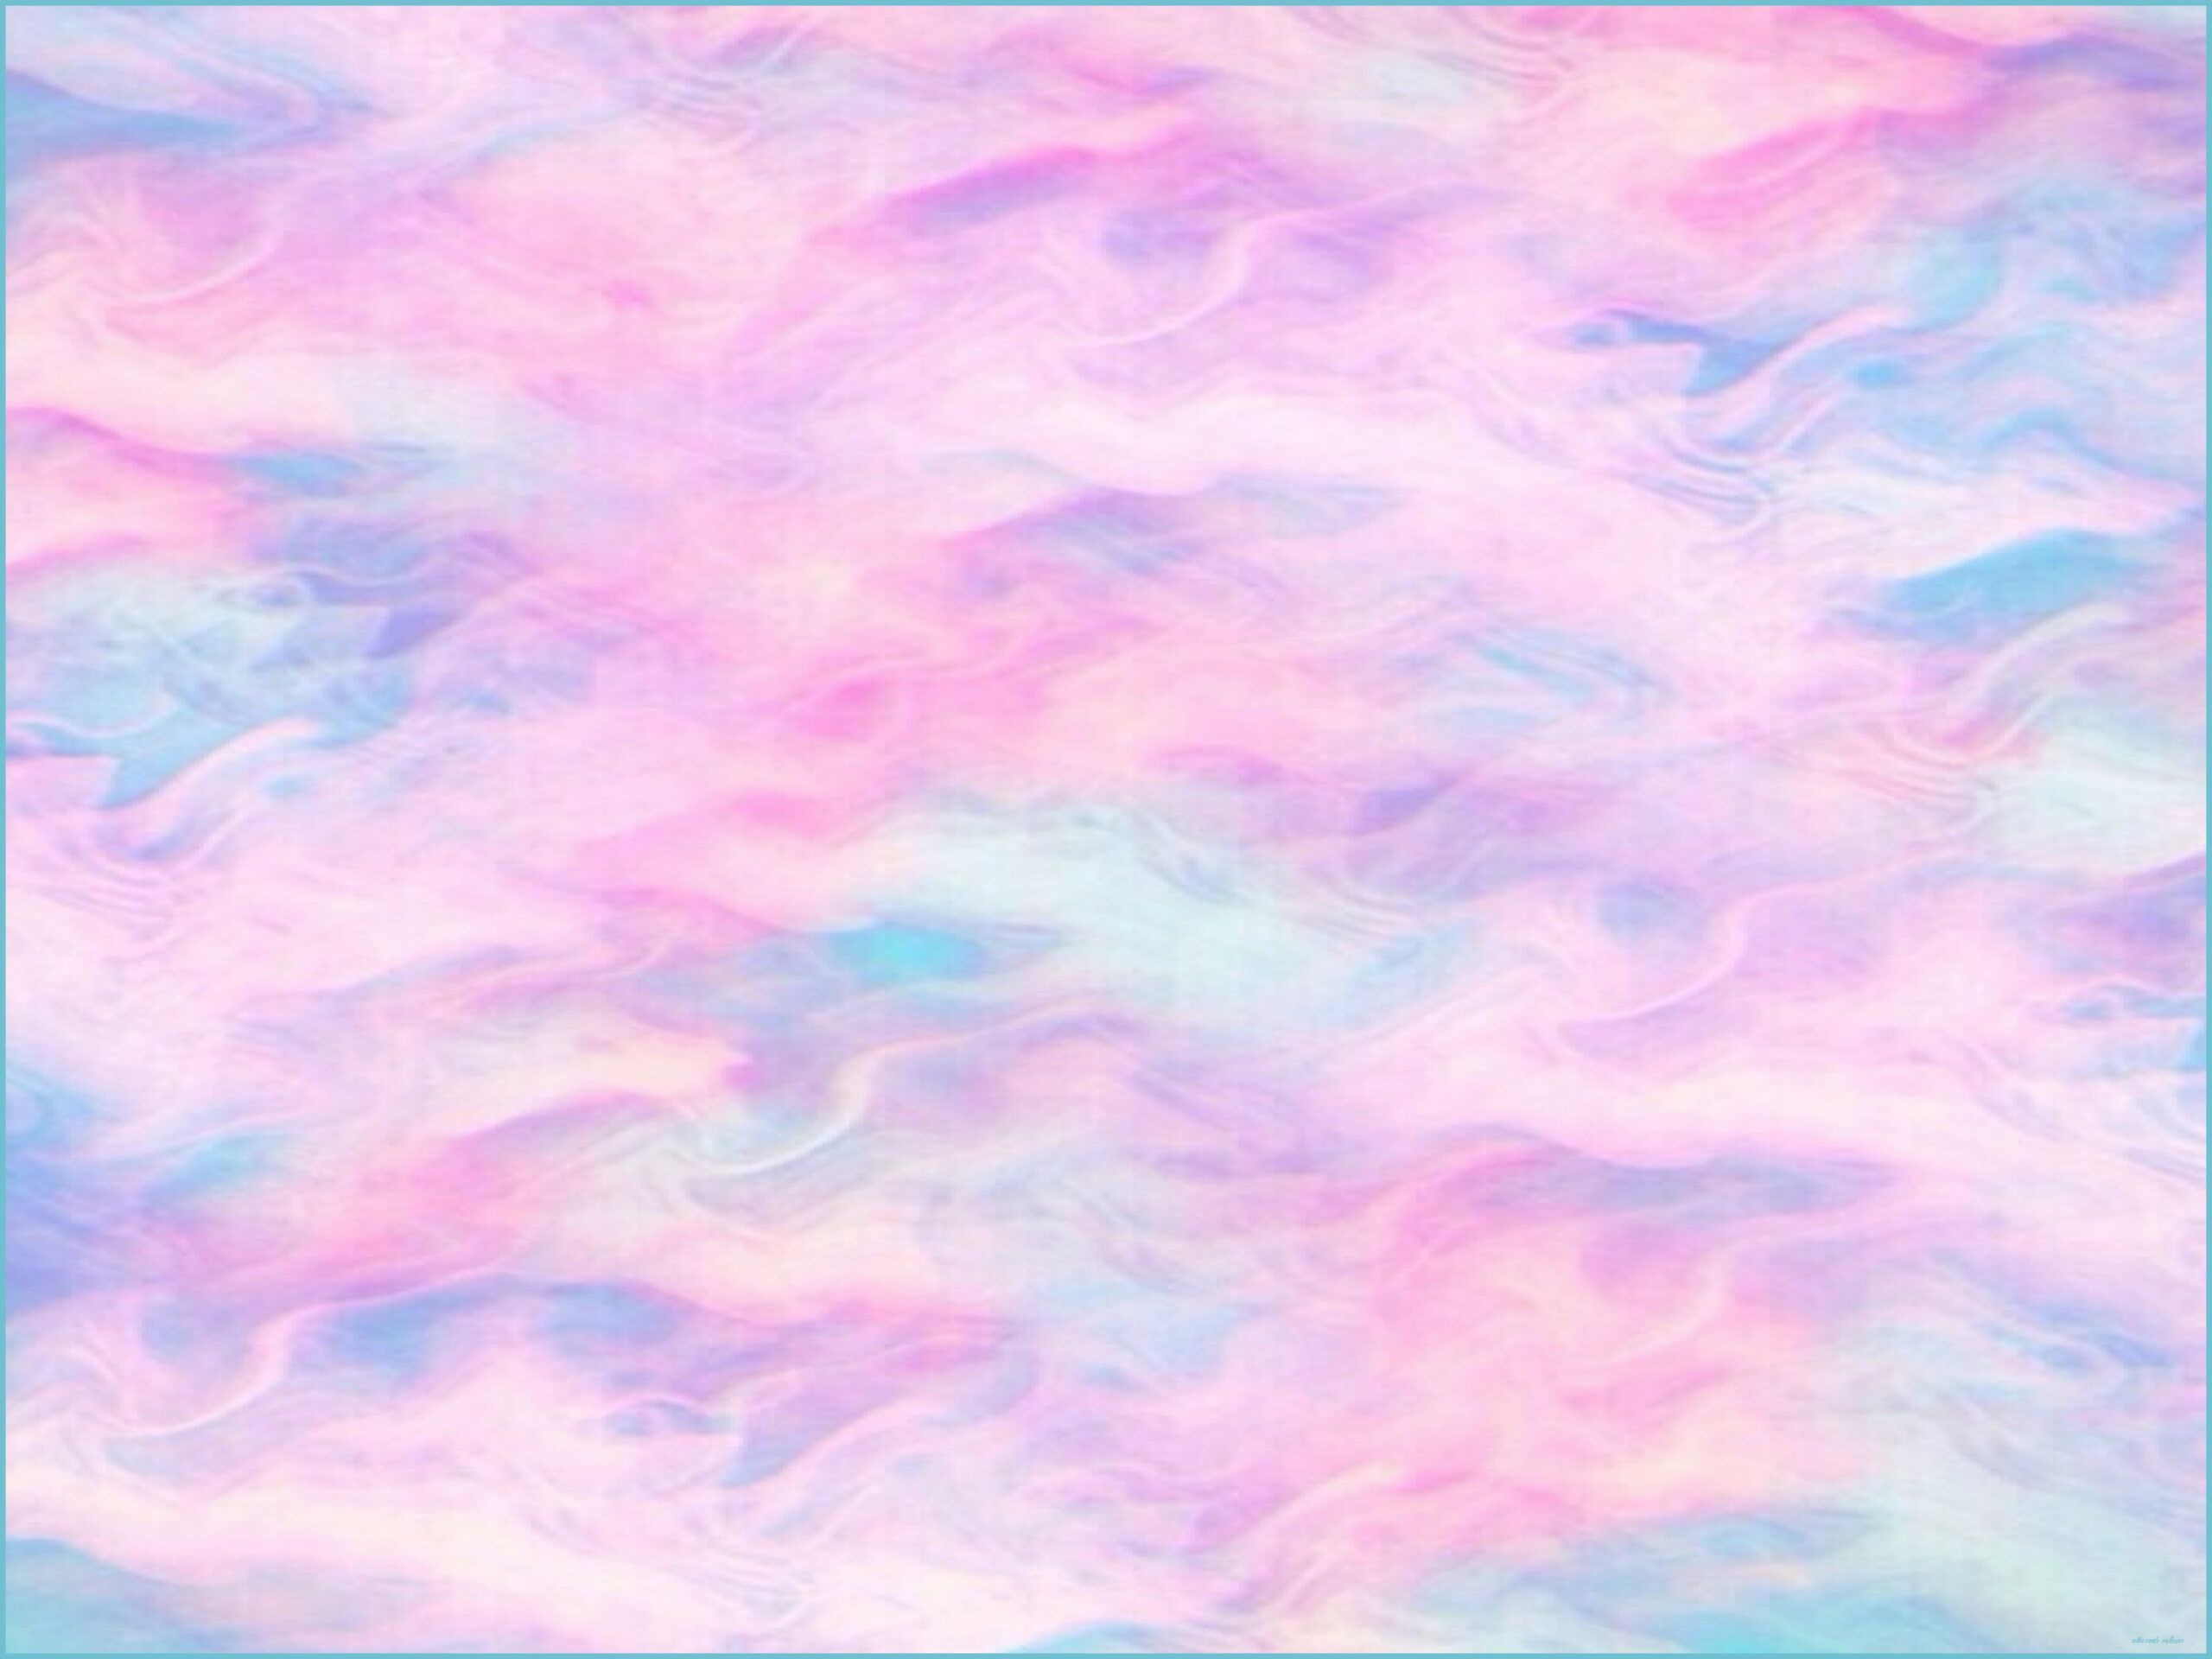 Cotton Candy Aesthetic Wallpaper